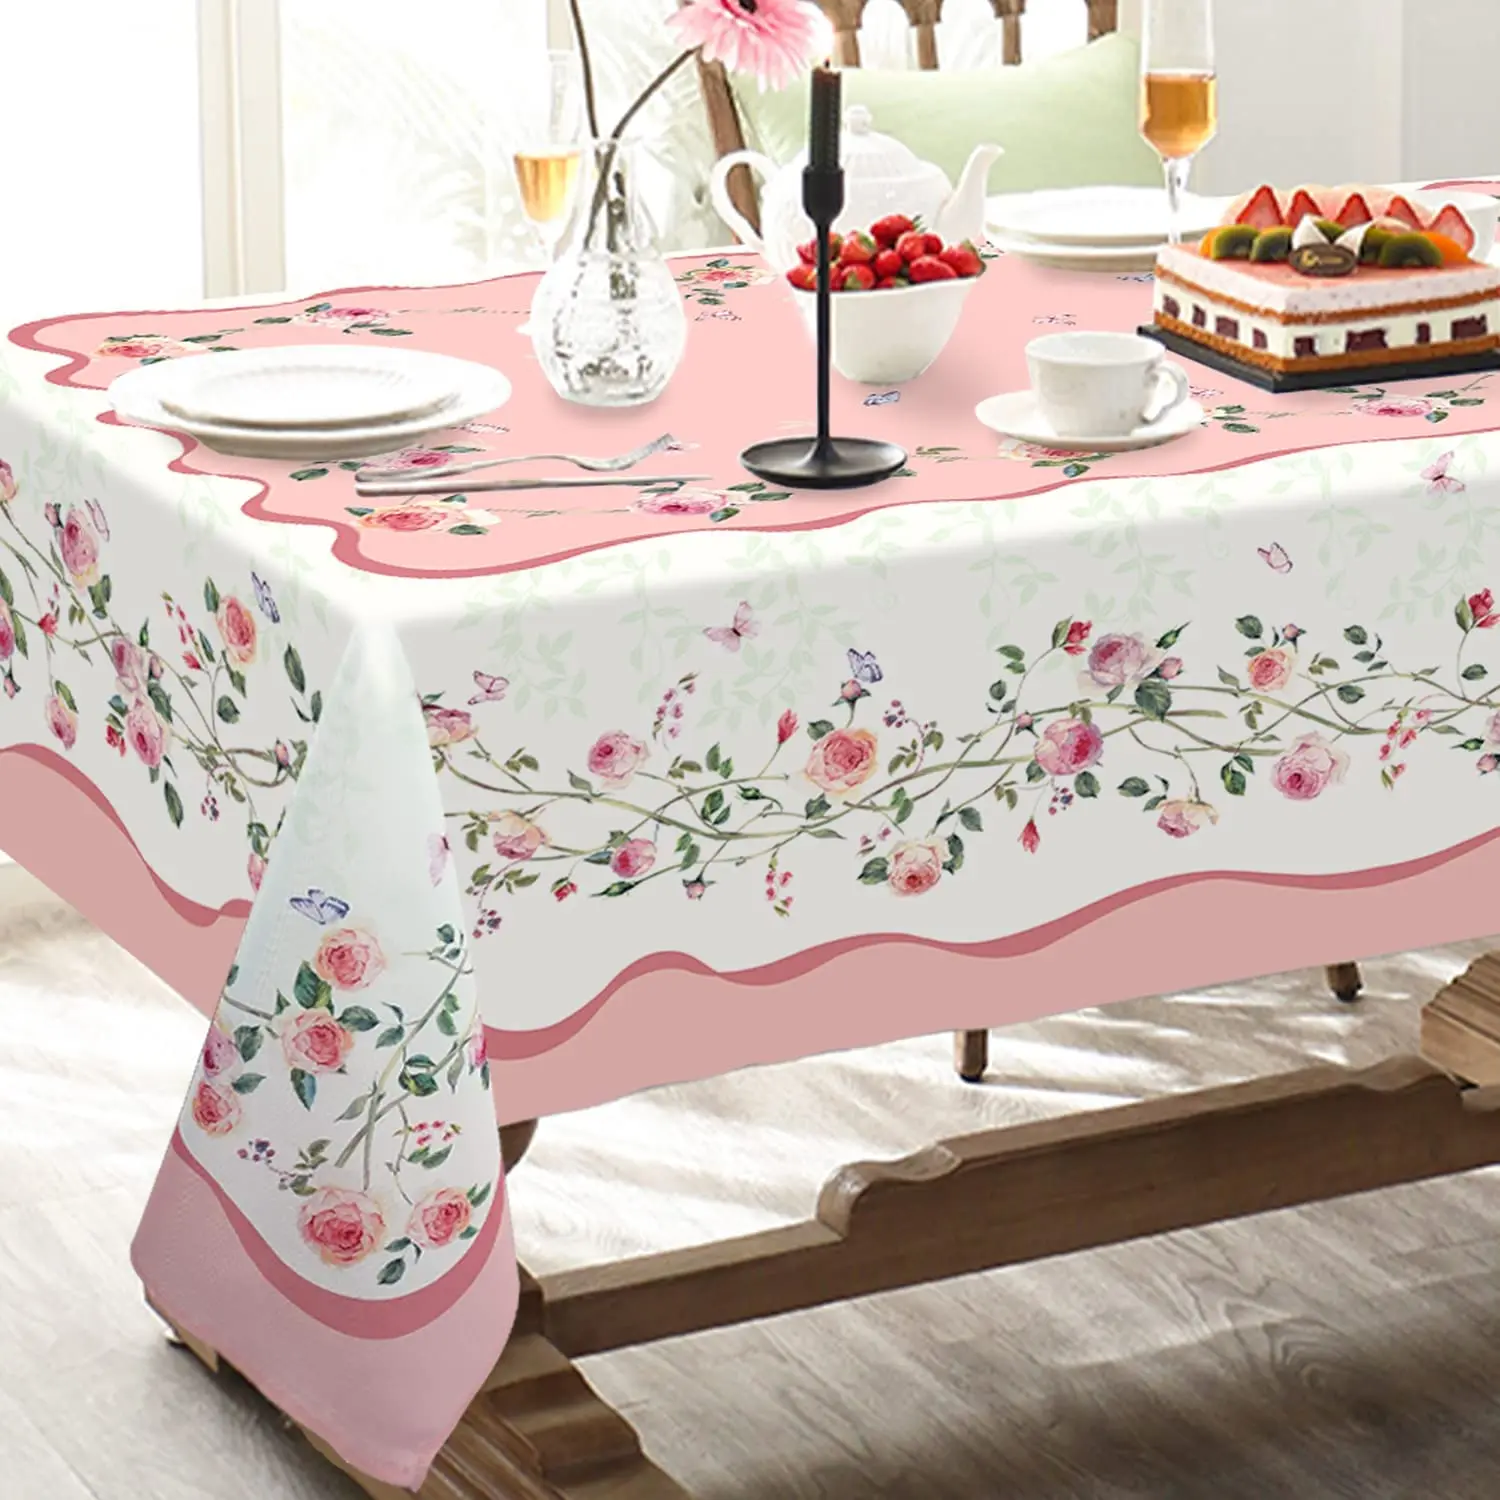 Rosette Butterfly Mothers Day Rectangle Tablecloth Kitchen Table Decorations Washable Waterproof Tablecloth Mothers Day Gift